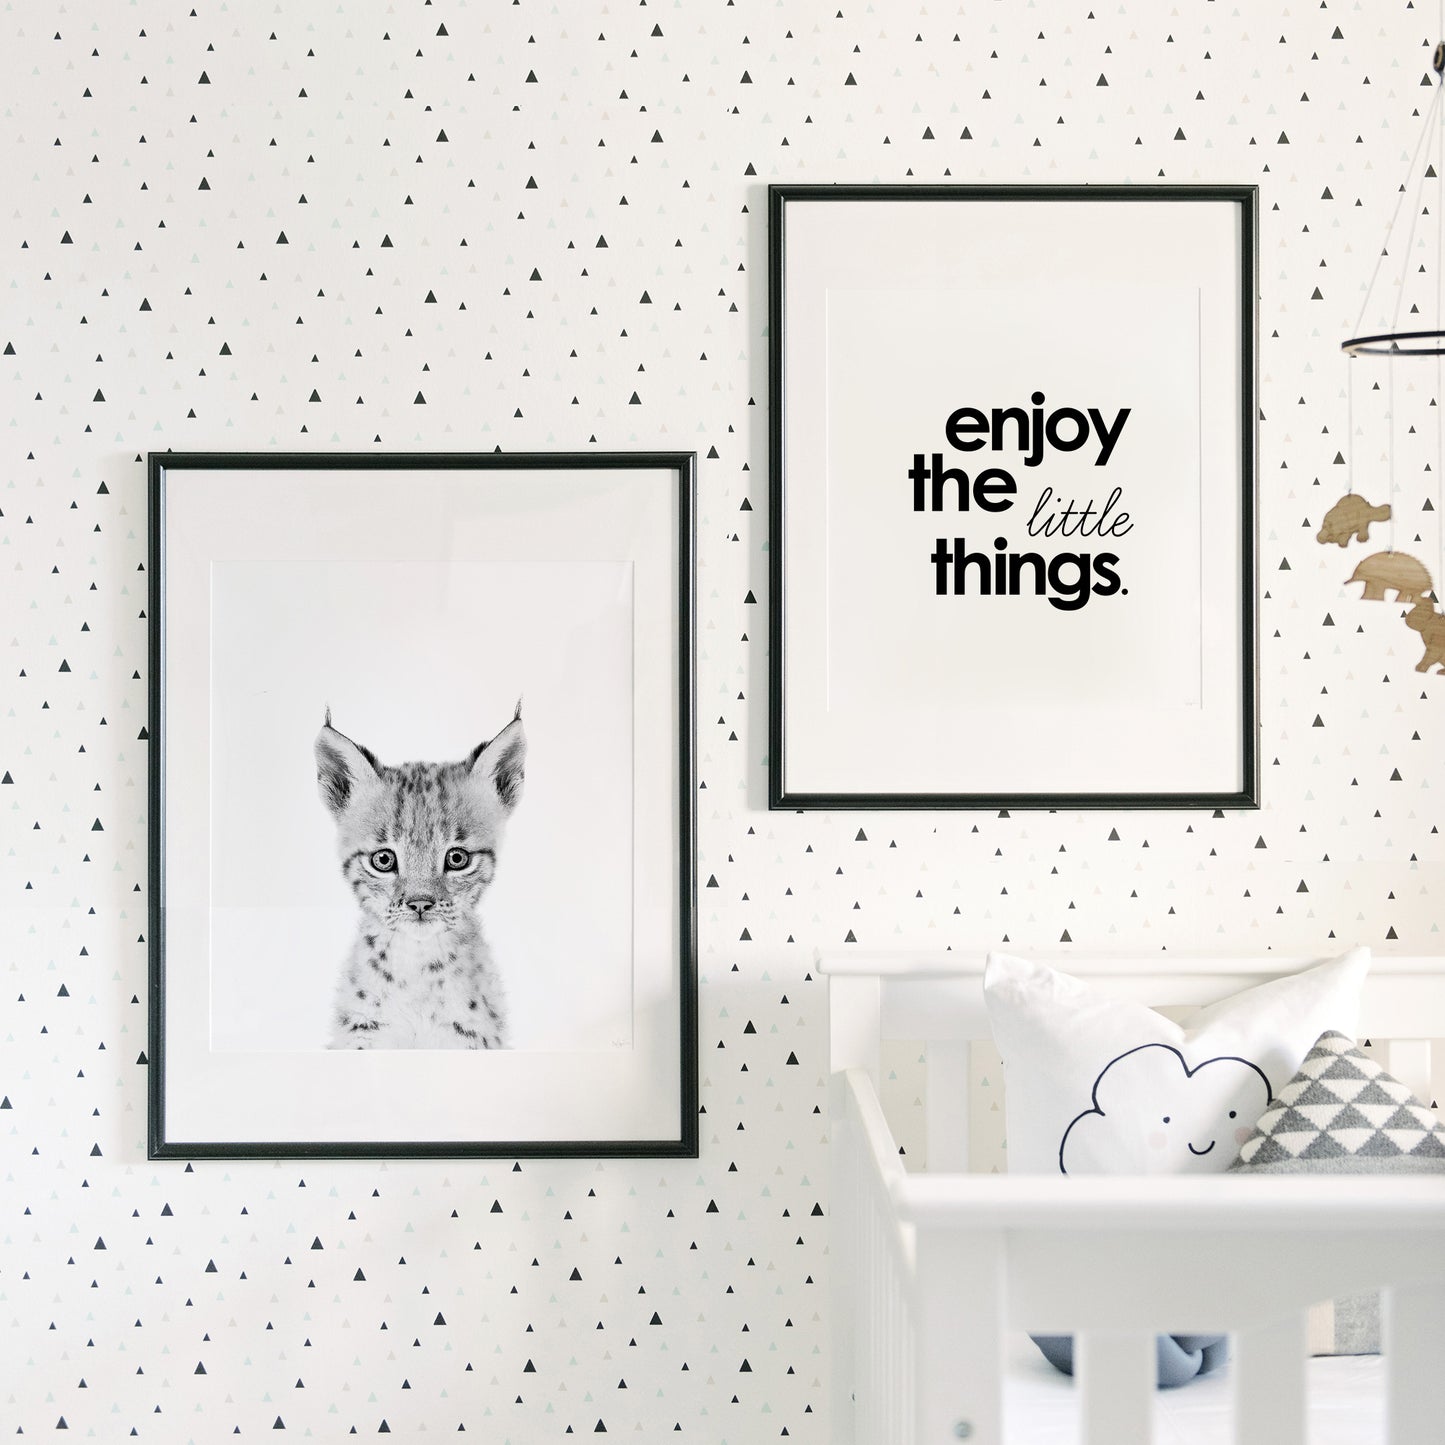 Black and White Baby Bobcat Wall Art for nursery